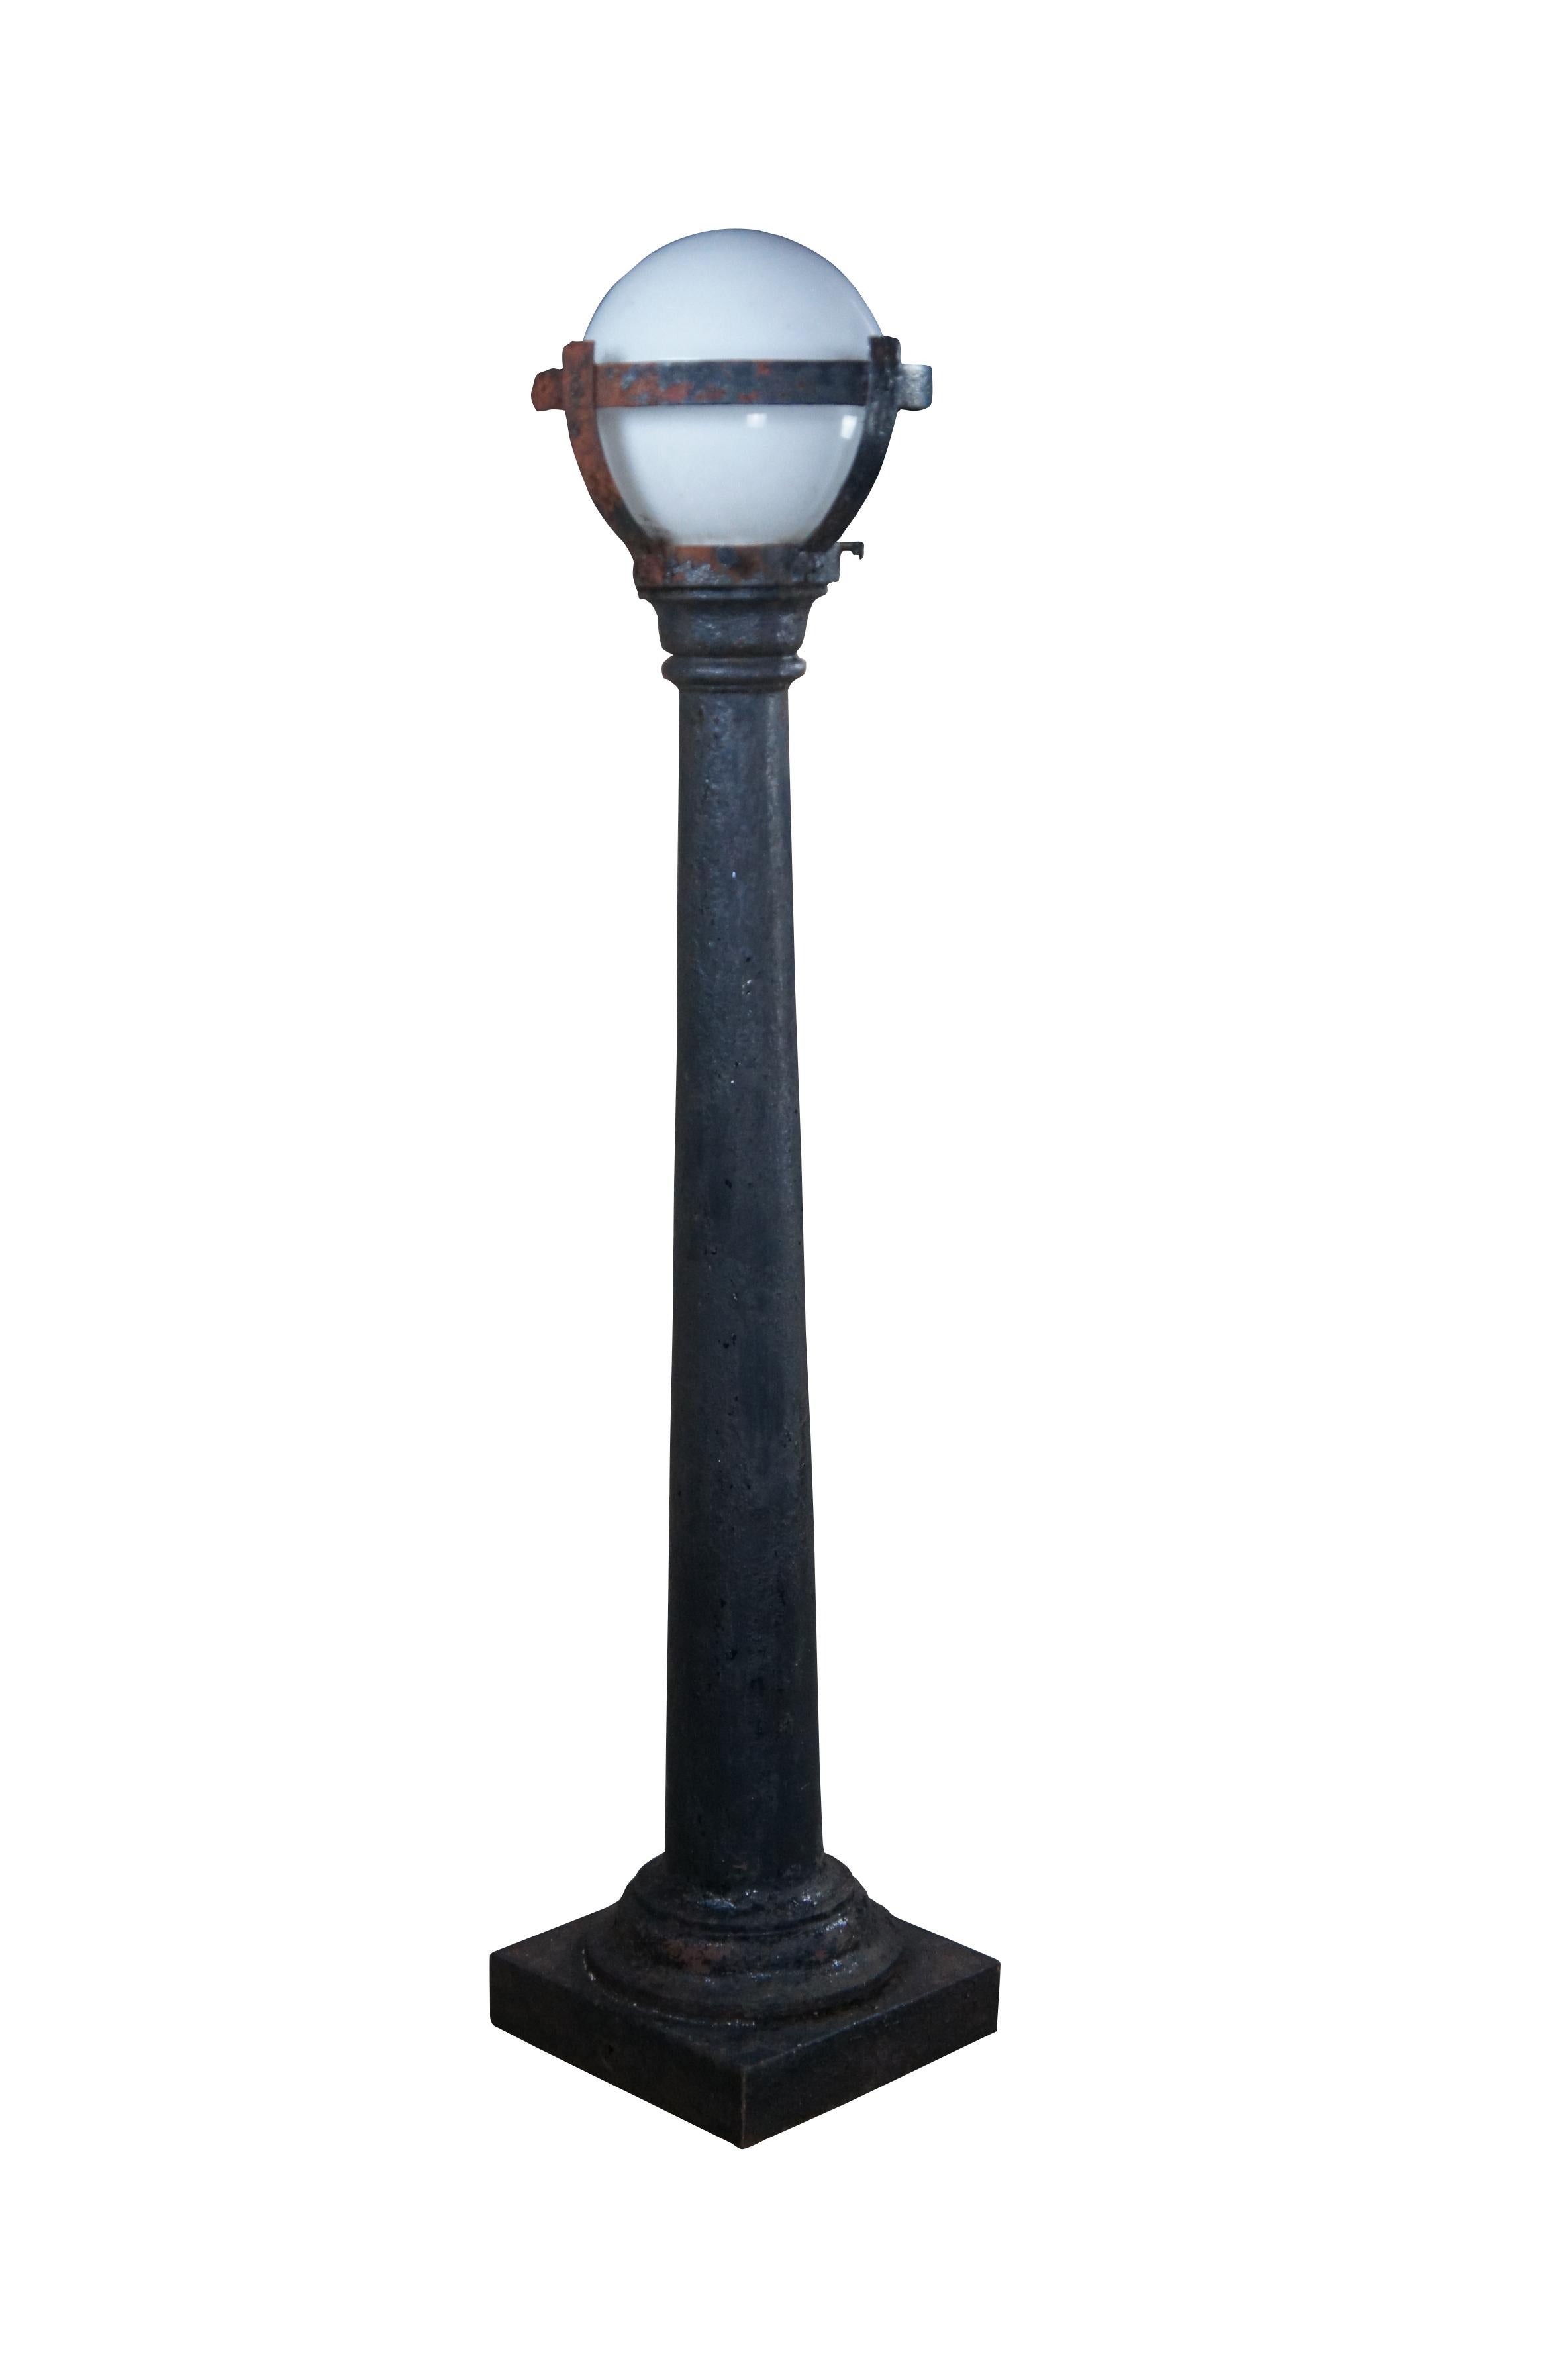 Antique Victorian industrial cast iron street post lamp or lantern featuring a square base with round tapered column and milk glass shade.